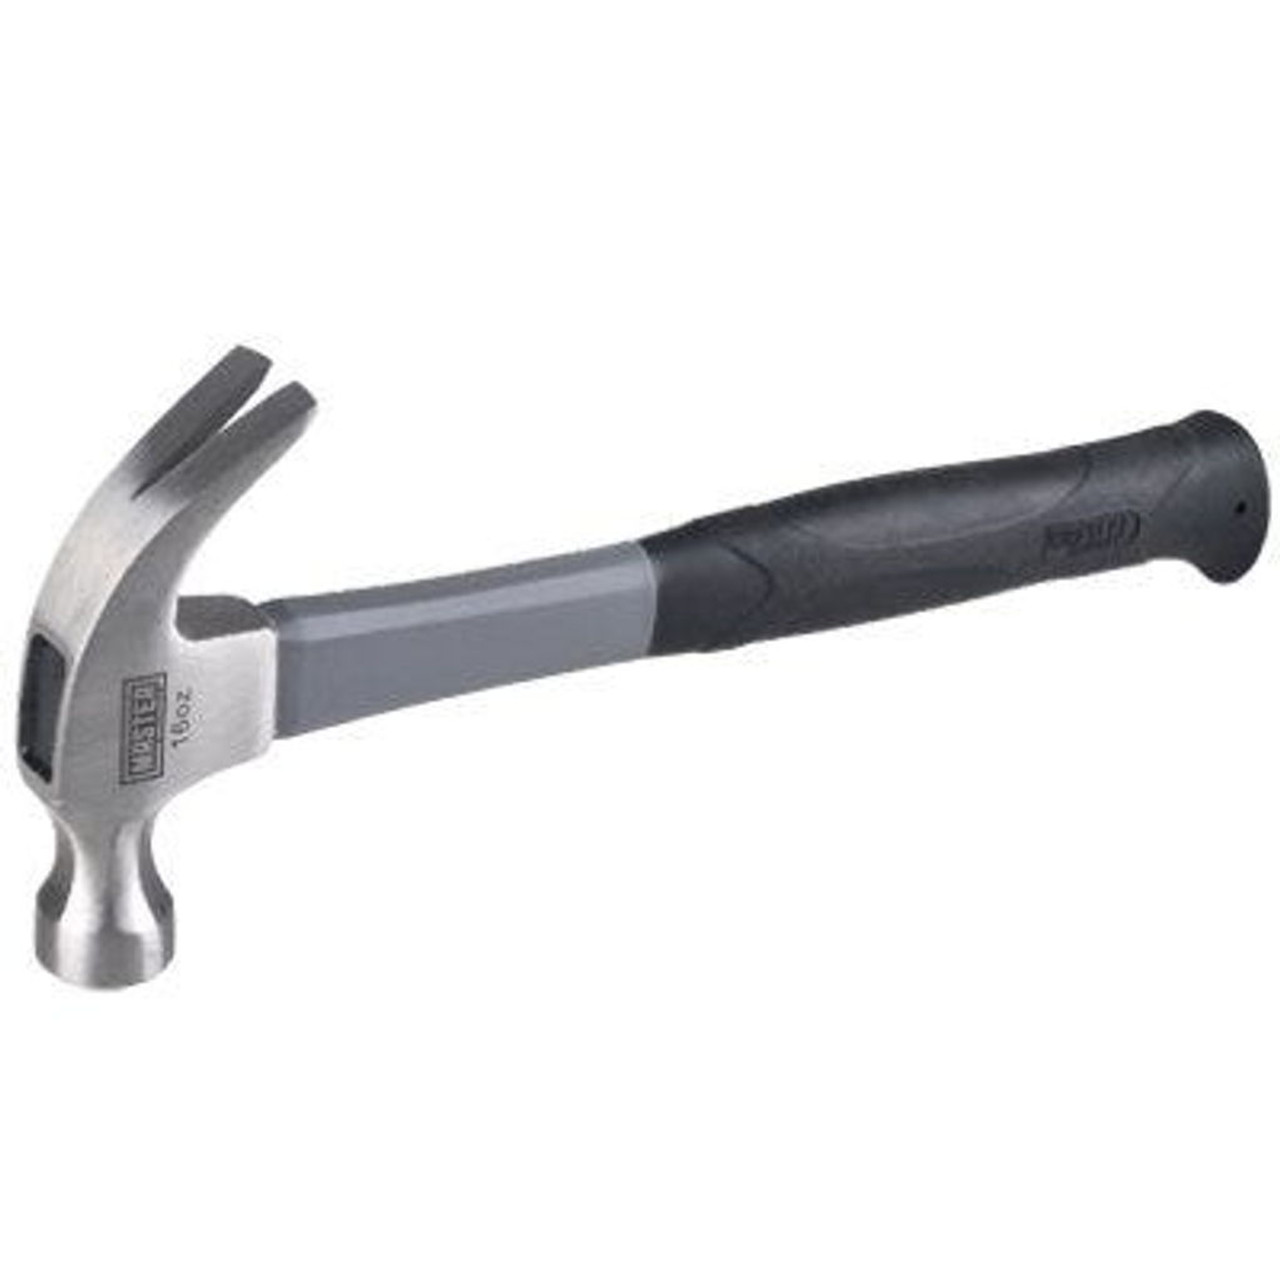 Stalwart Fiberglass Claw Hammer With Comfort Grip Handle And Curved Rip Claw,  Red